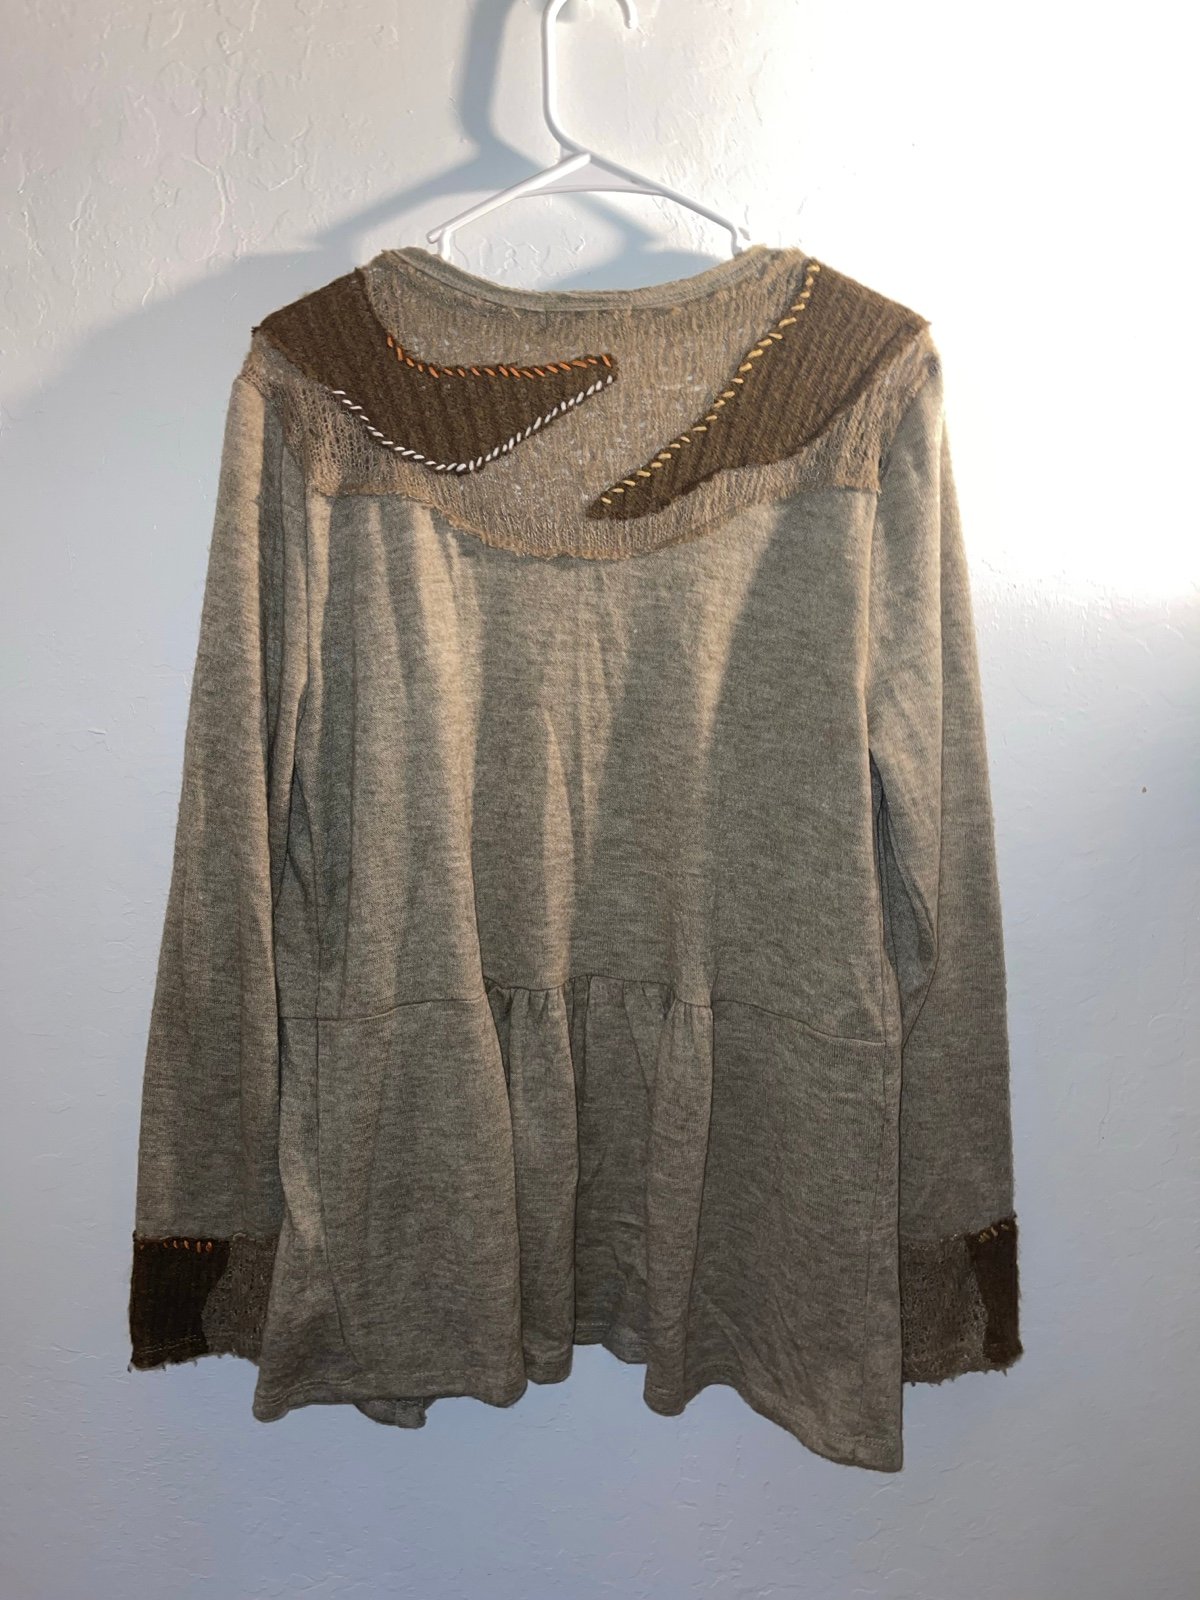 High quality Women’s mystree cardigan size large GPevei9vo just for you